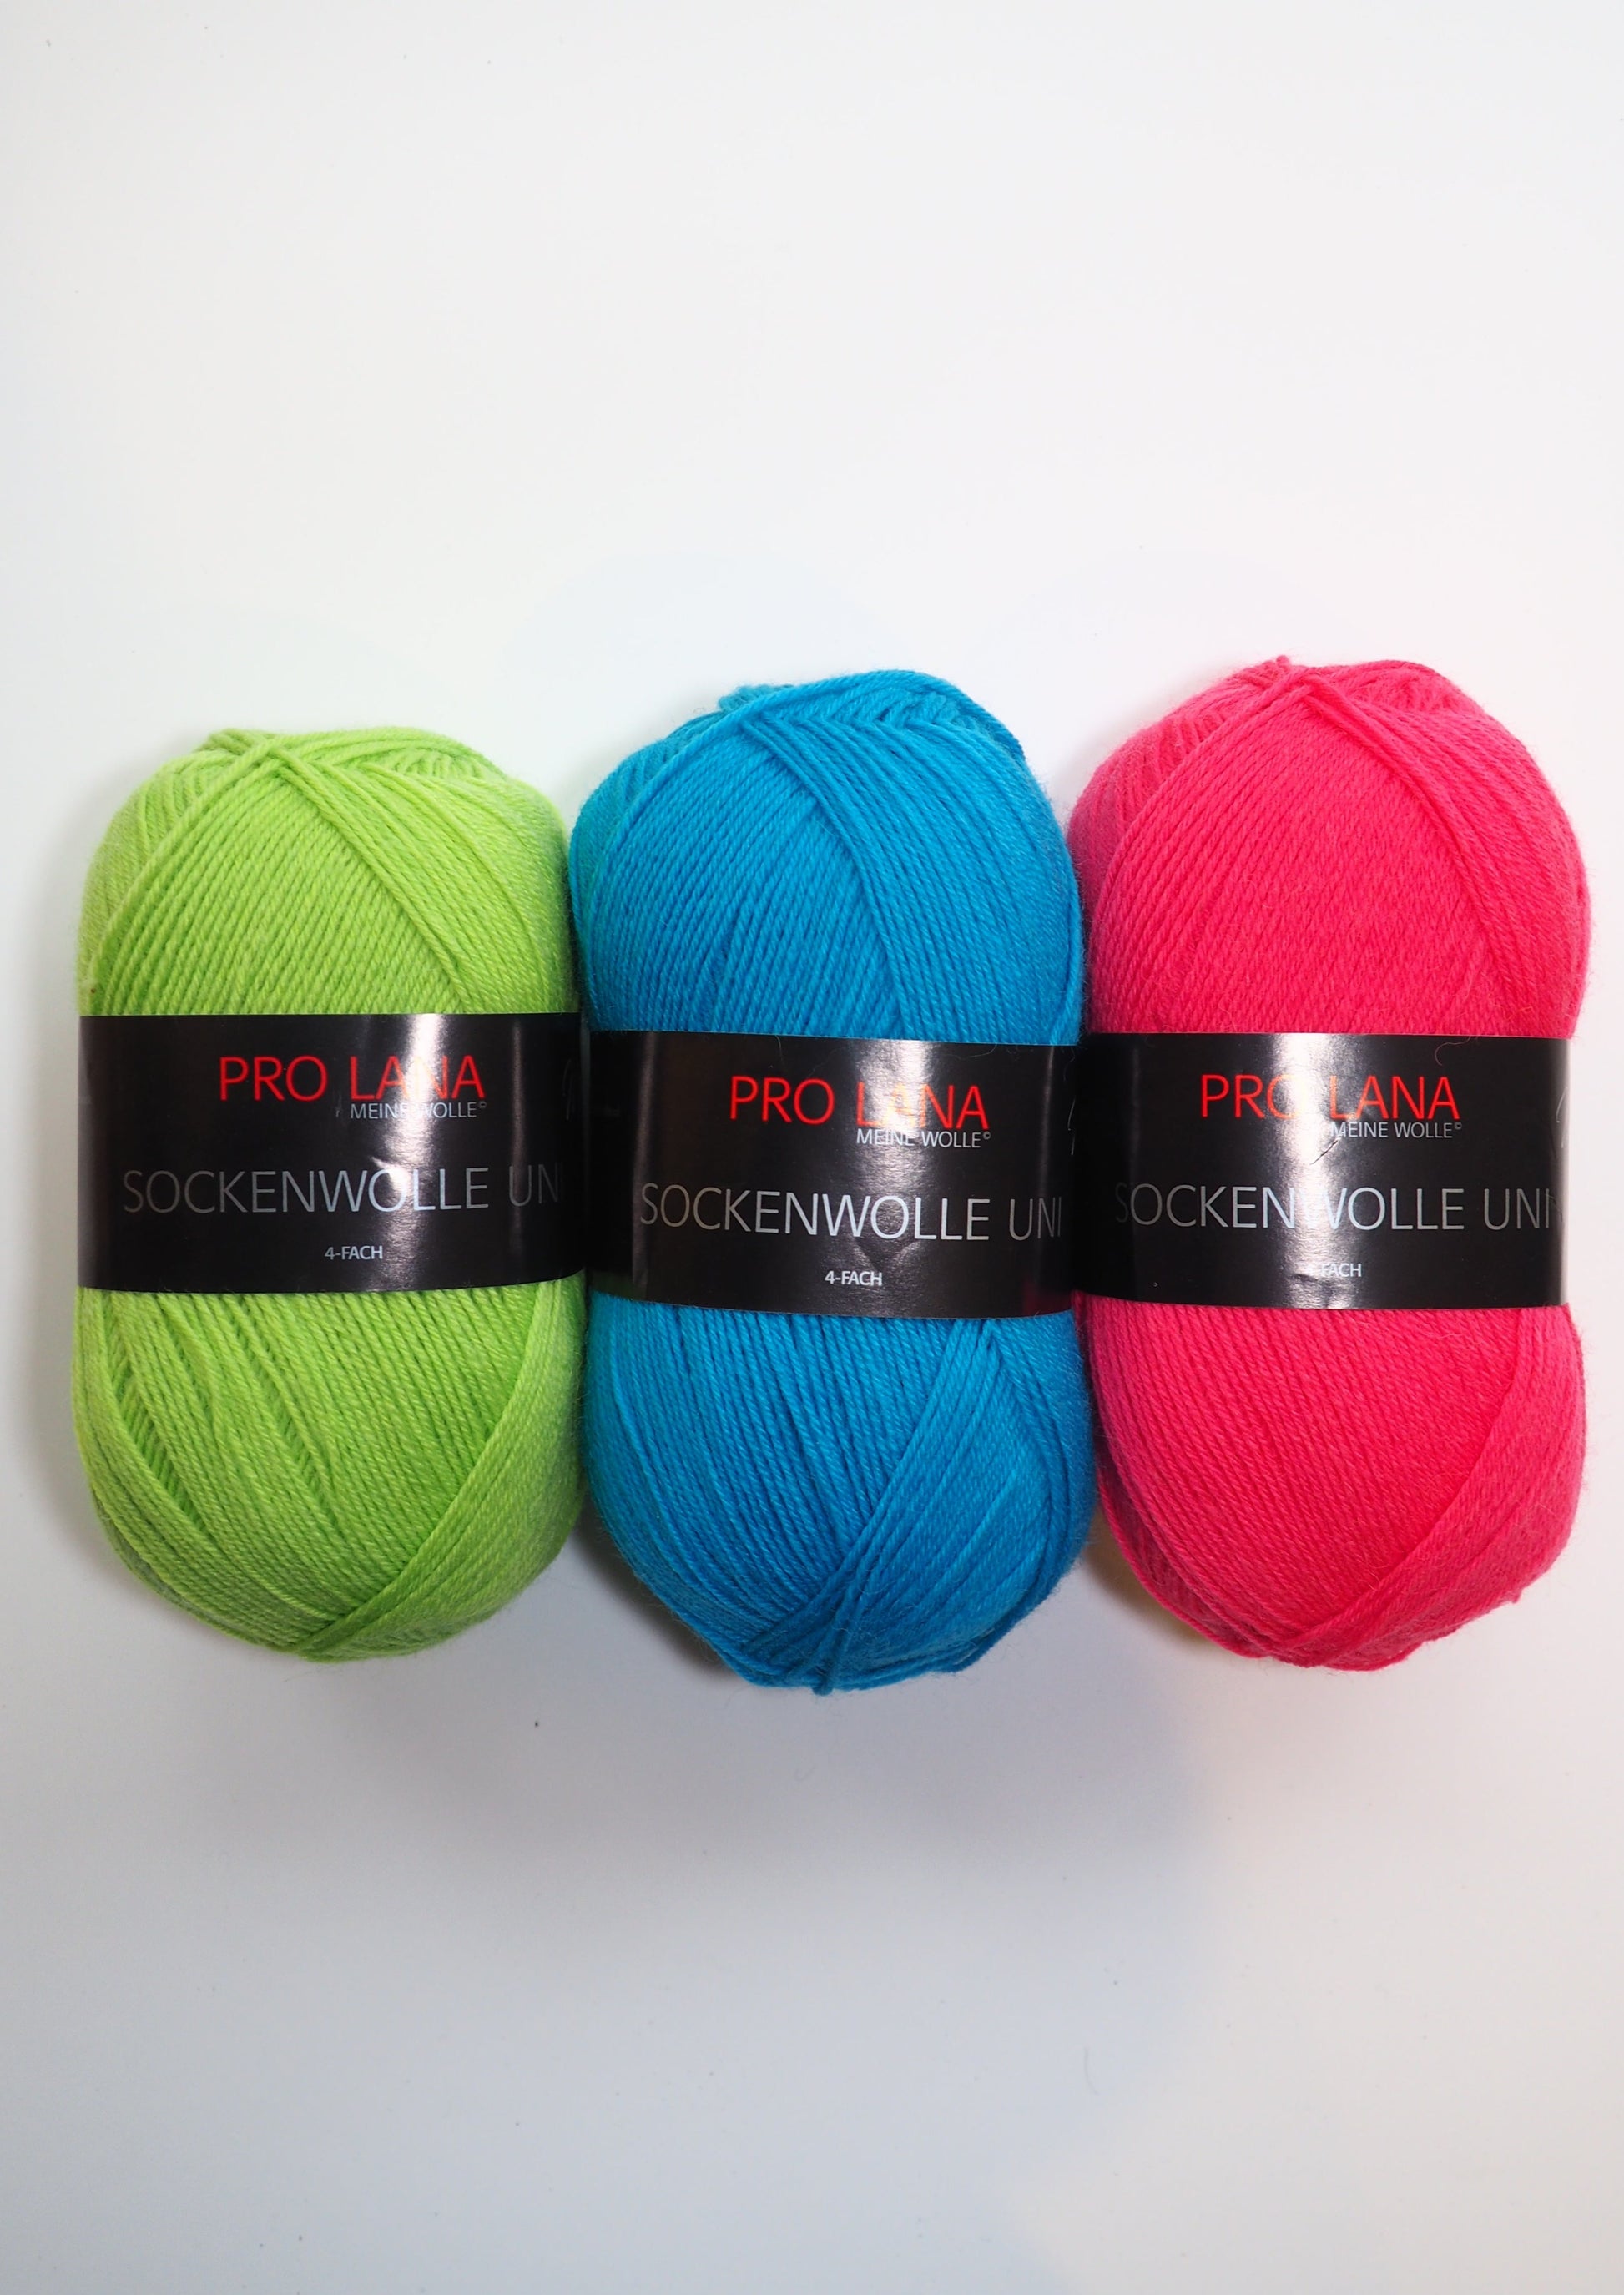 Pro Lana Yarns Sockenwolle Uni - Three Balls of Versatile Classic Colors: Perfect for classic socks, budget-friendly sweaters, and baby items. Content: 75% Superwash Wool, 25% Polyamide. Available at Good Grief Yarn.